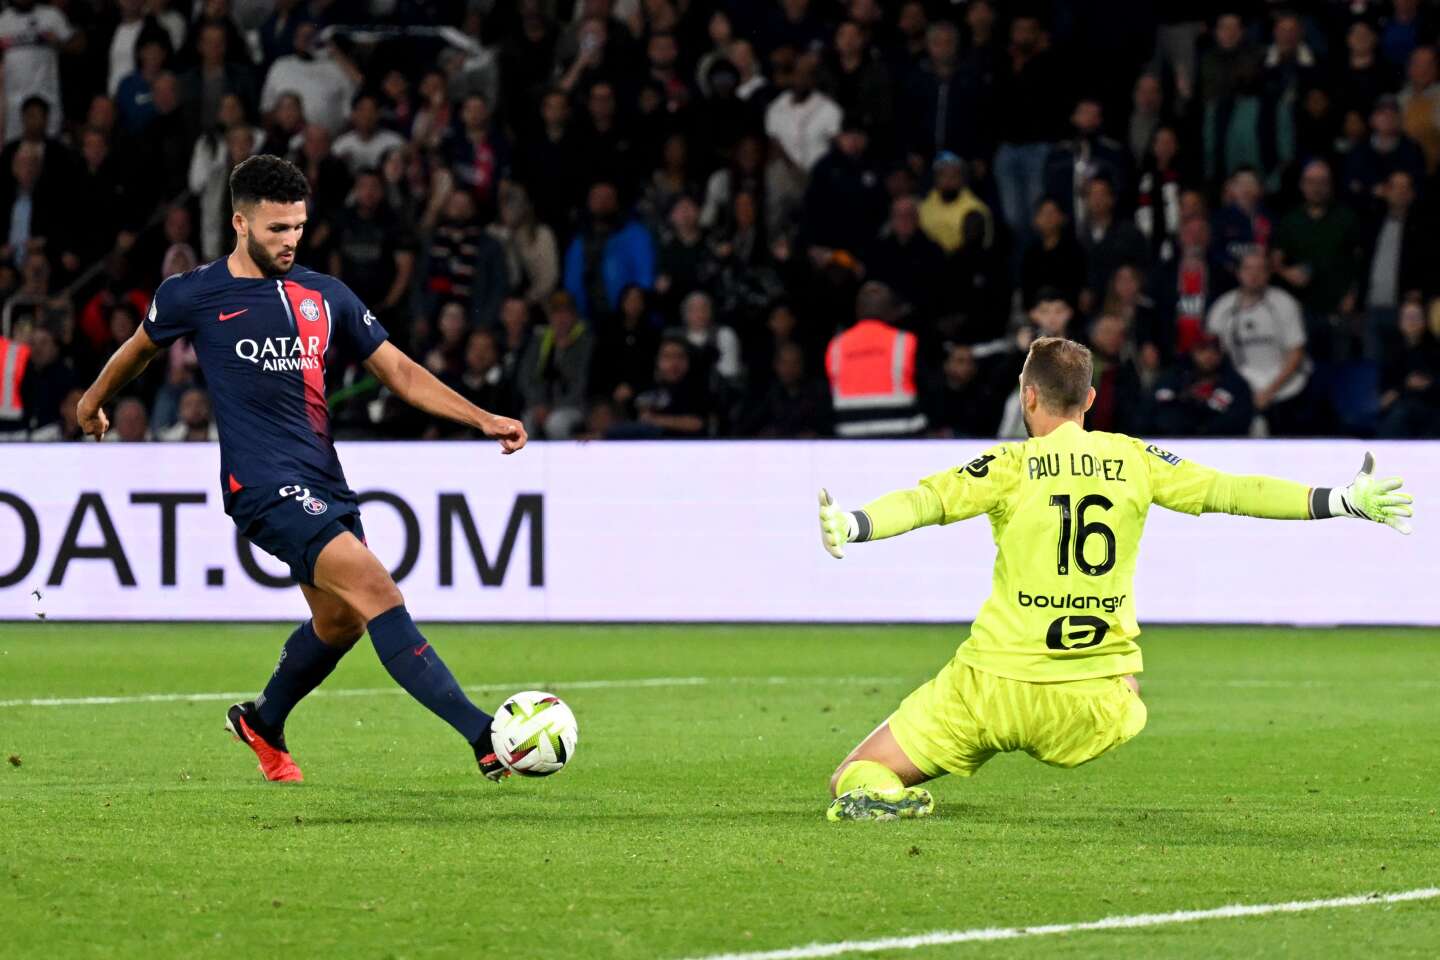 PSG crushes Marseille 4-0 in a one-sided “classic”